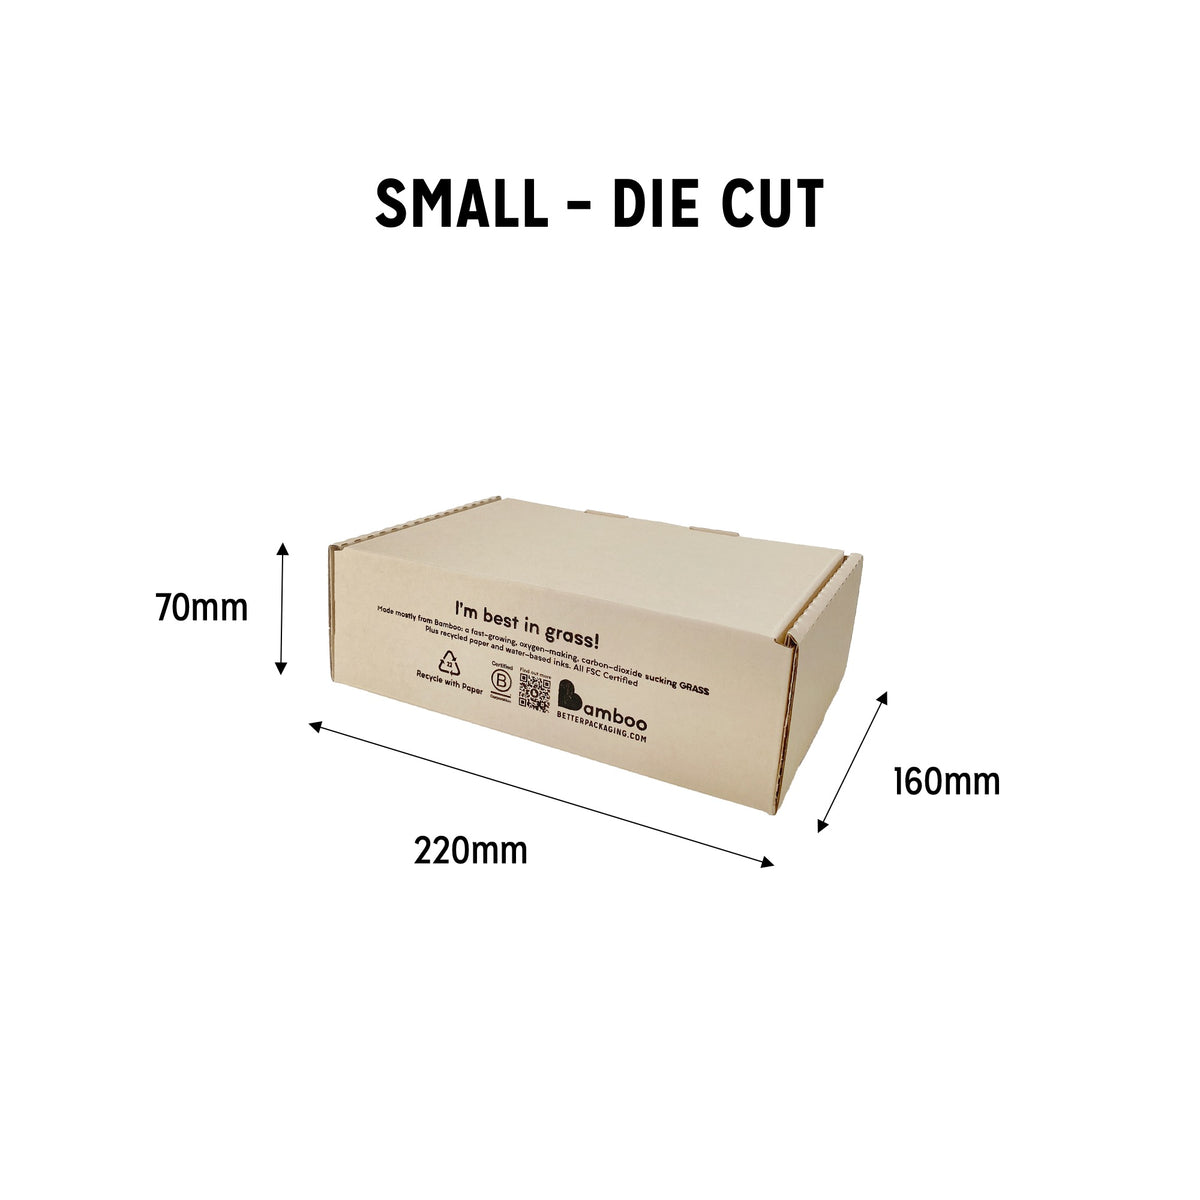 Small sized die cut Better Packaging bamboo box. 70mm high, 220mm wide, 160mm deep